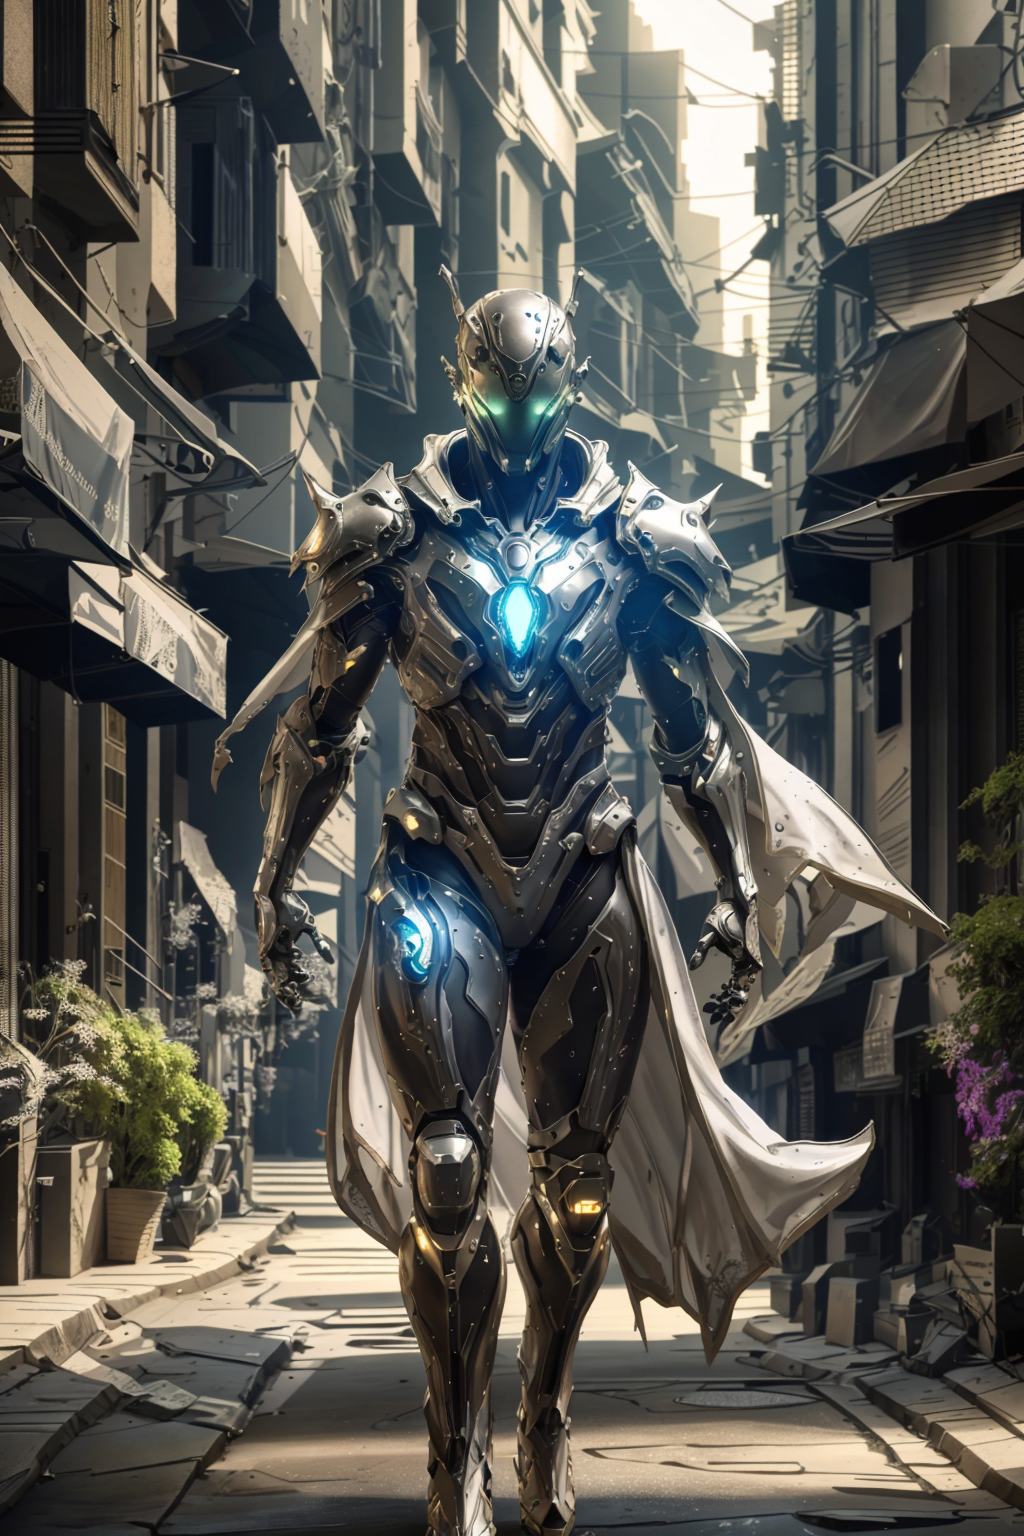 Futuristic Robot in a Cityscape with White Cape and Blue Eyes